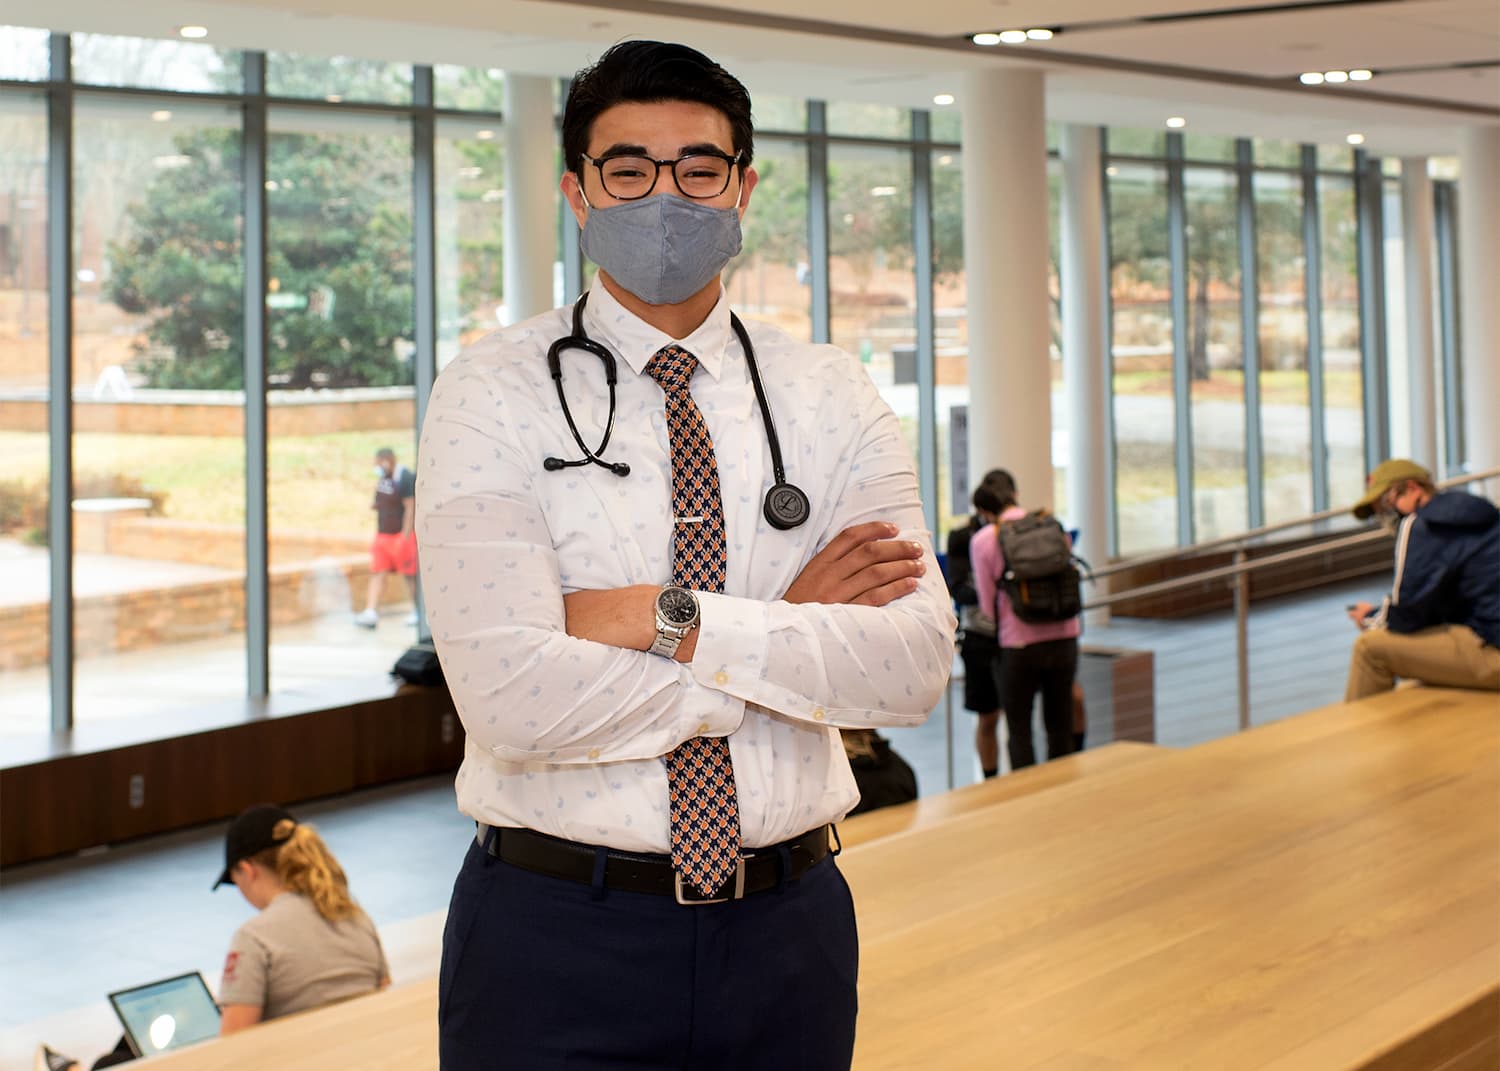 Jared Cruz stands in the newly renovated LSC with a stethoscope around his neck.